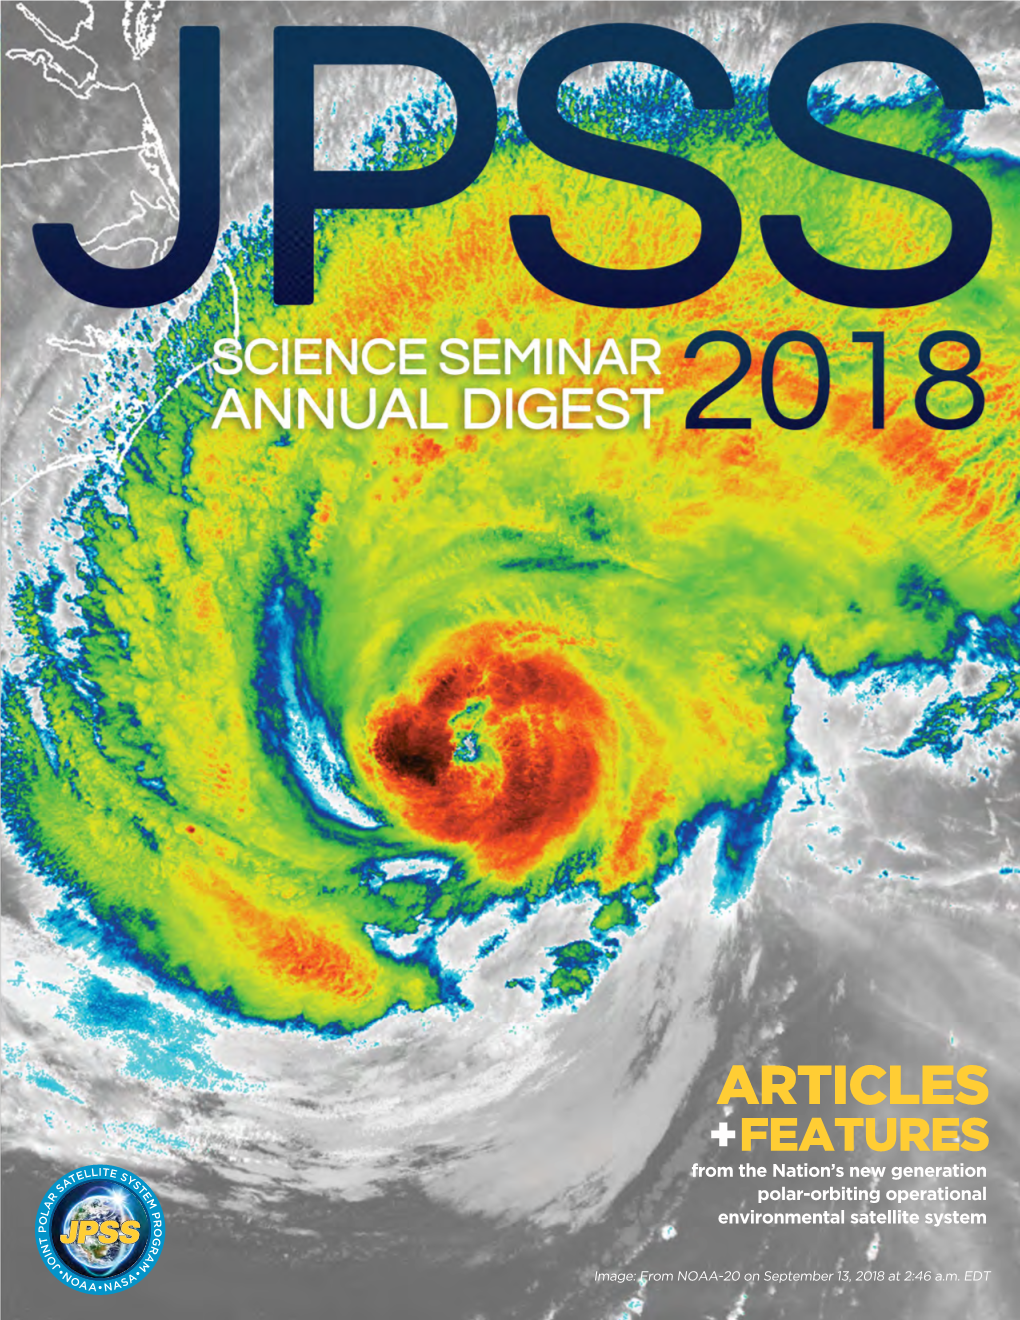 JPSS Science Seminar Annual Digest 2018 Additional Highlights from This Past Year Include: a New PGRR Call-For-Proposals Was Released in November 2017